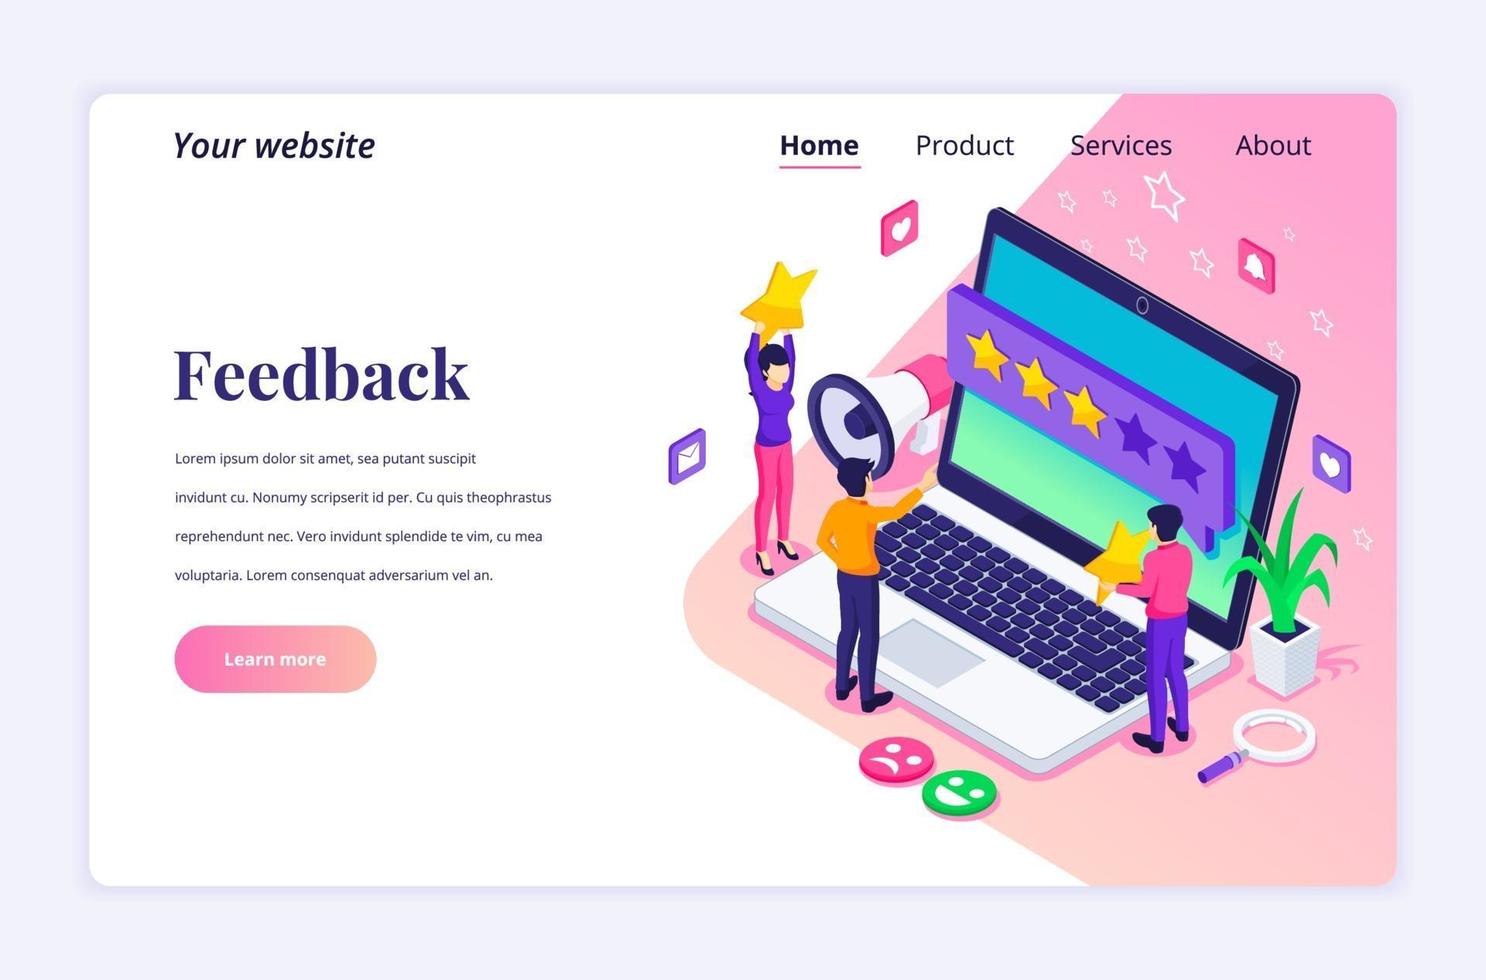 Template-Produk SS Illustration - Landing Page 8 CS A3 Pinks EE vector